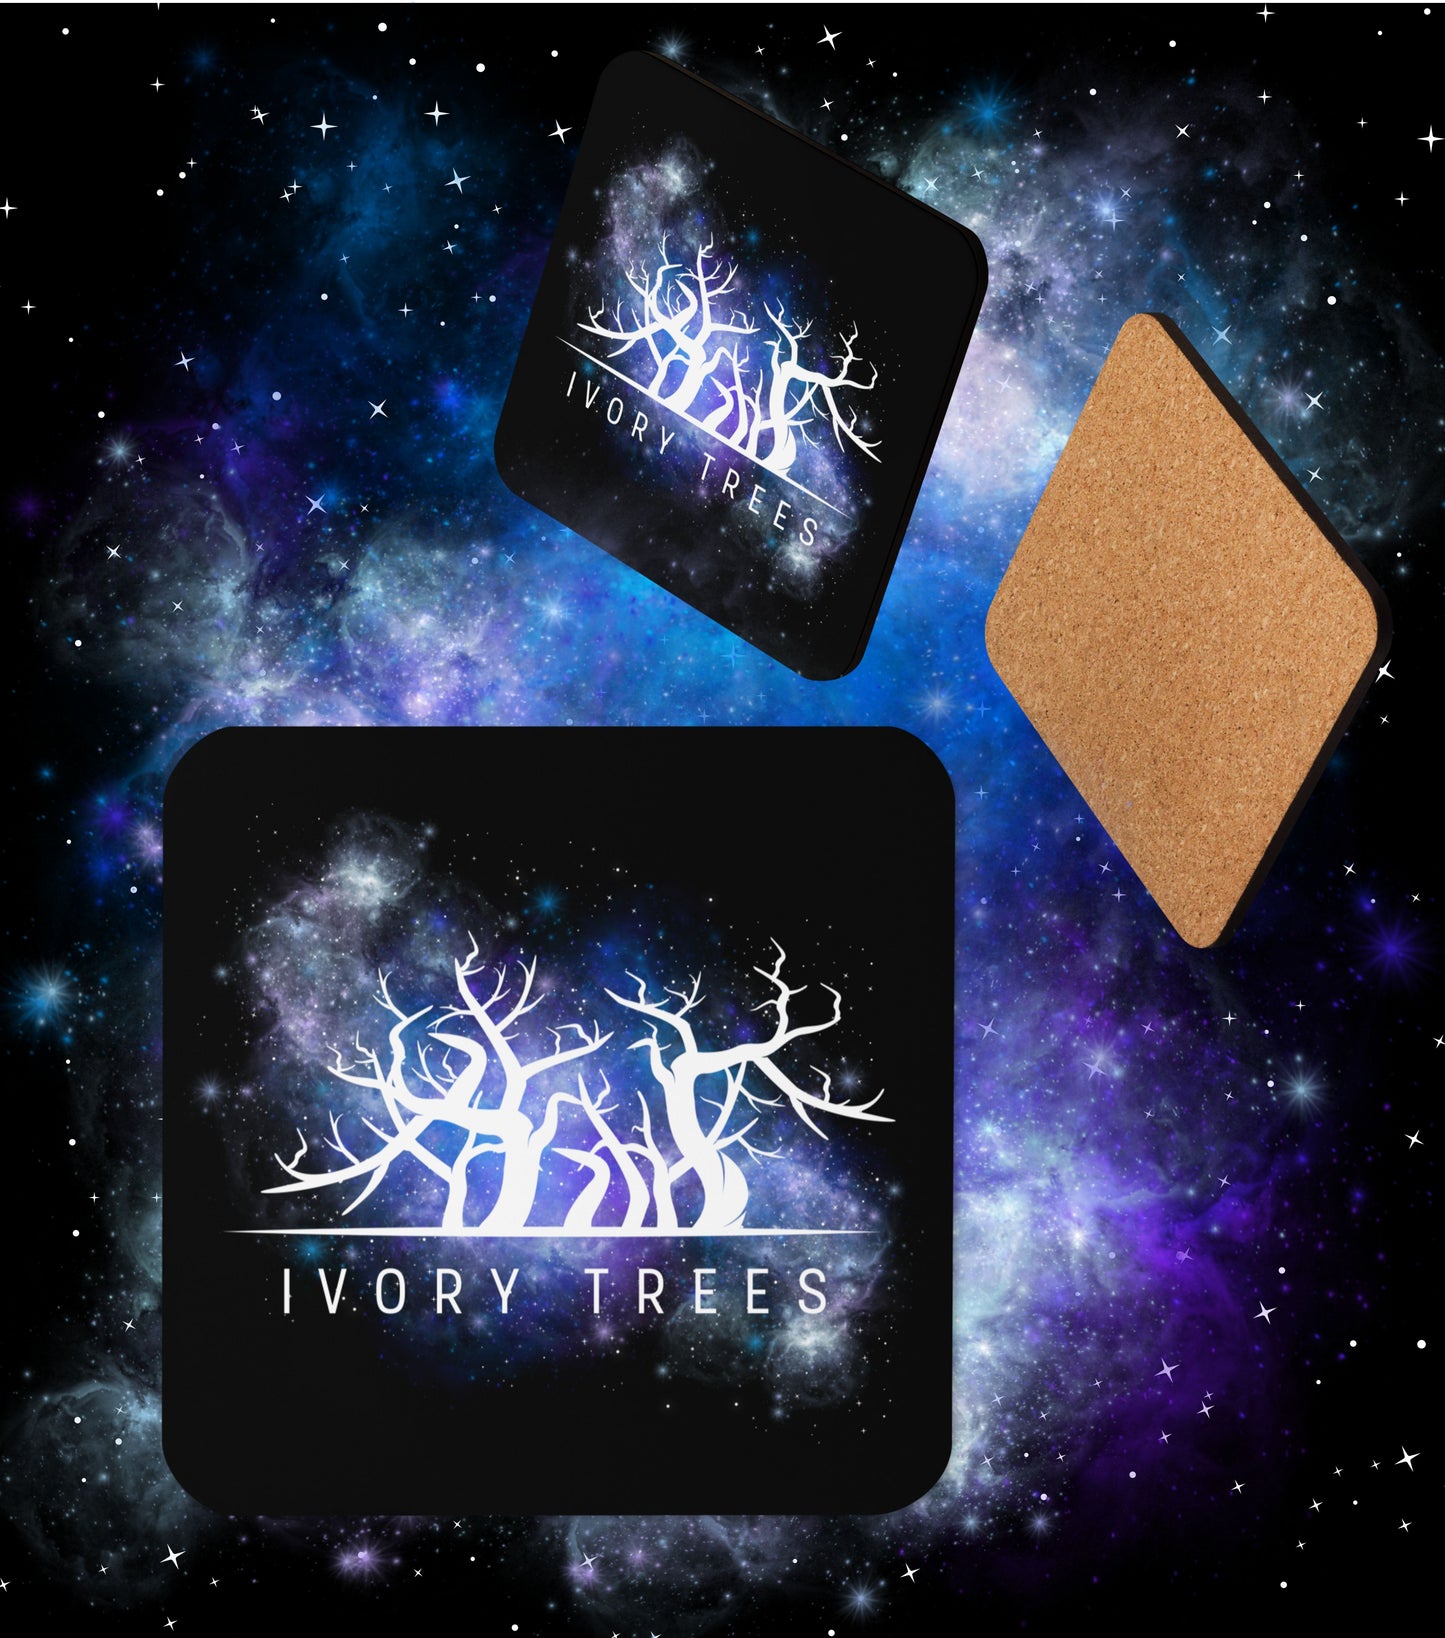 IVORY TREES NEBULA Coaster (Cork-Backed) - The Diving Universe by Kristine Kathryn Rusch